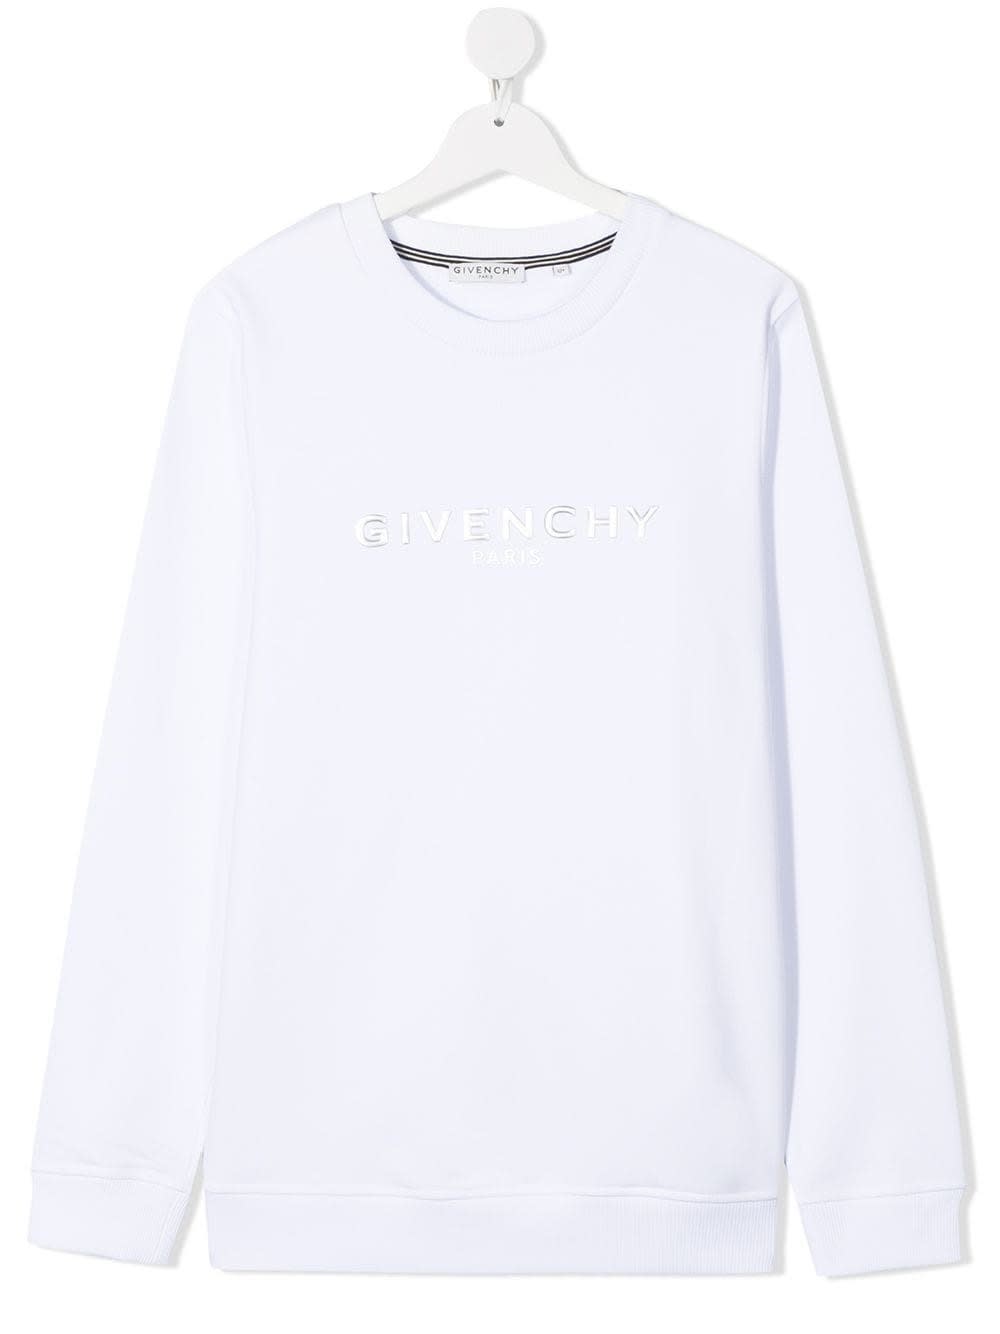 GIVENCHY WHITE JERSEY SWEATSHIRT WITH LOGO,11782090